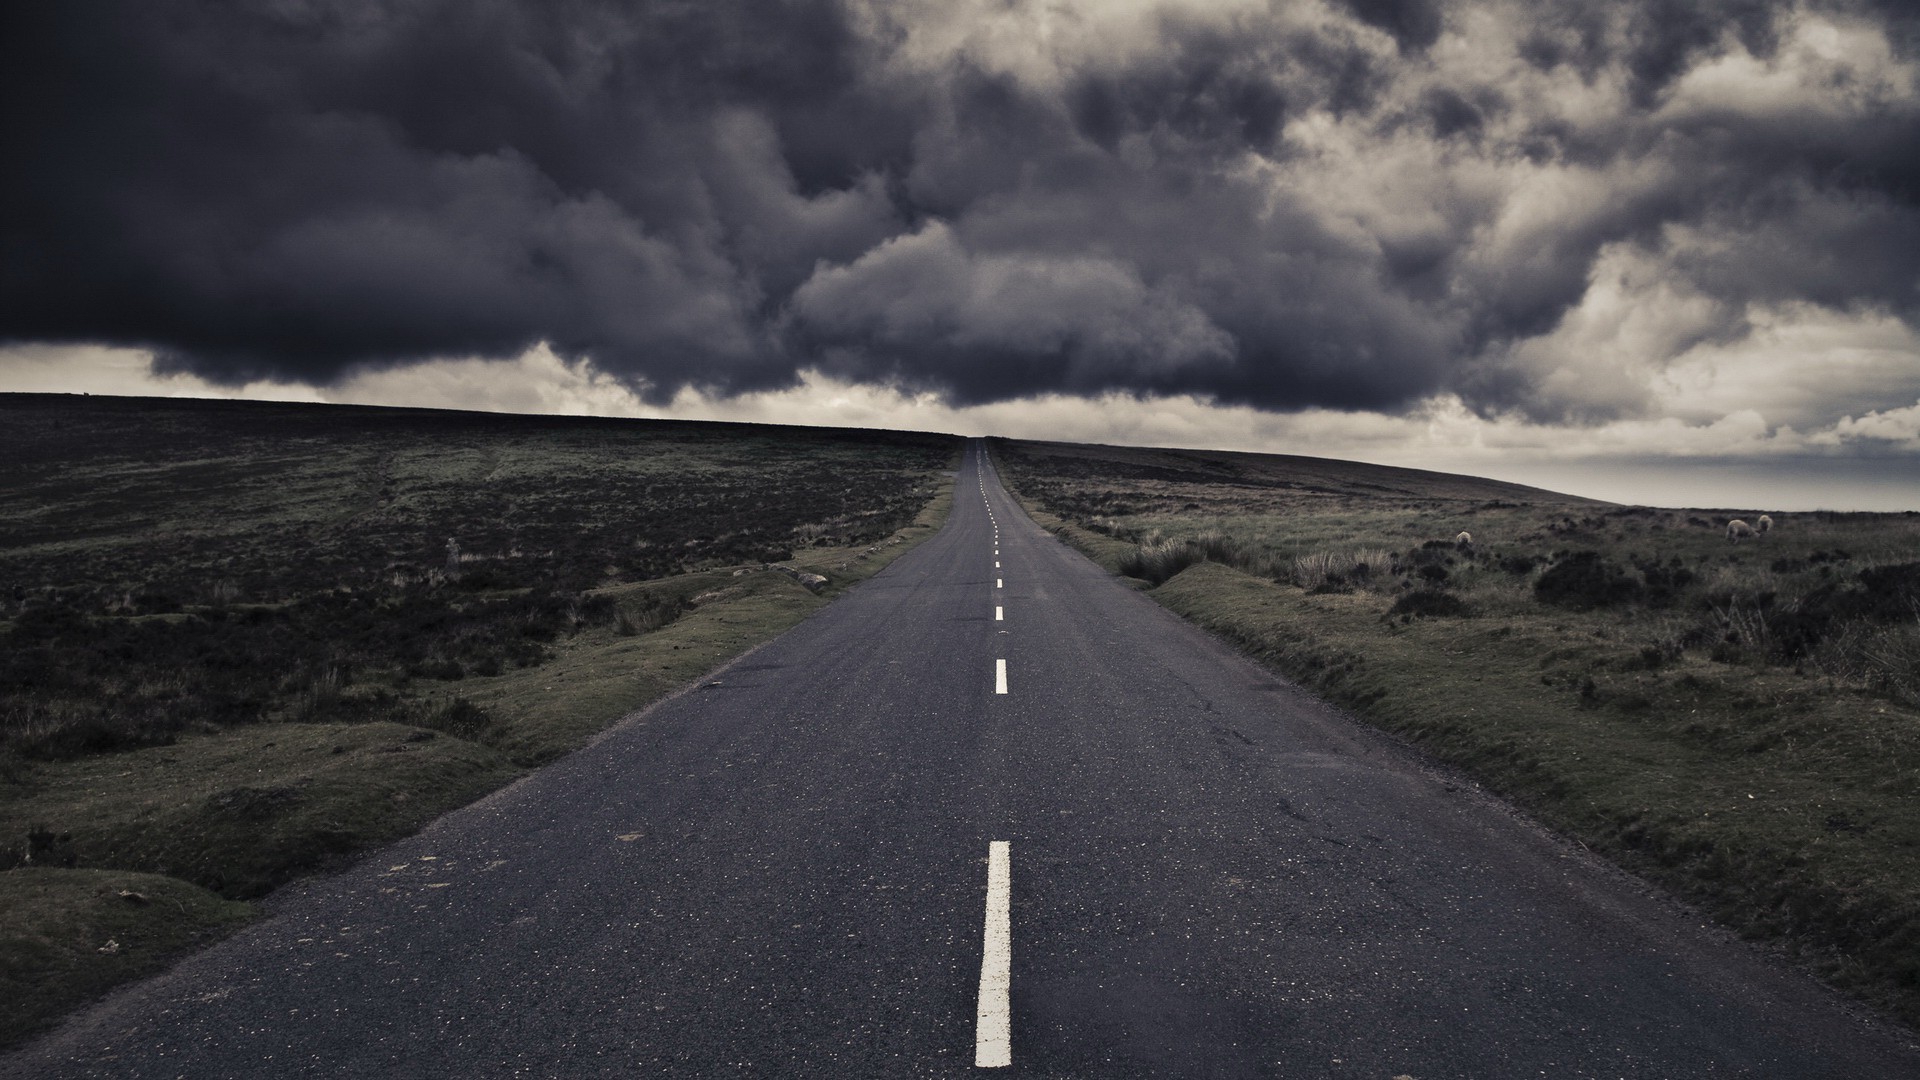 The road to the unknown under heavy clouds